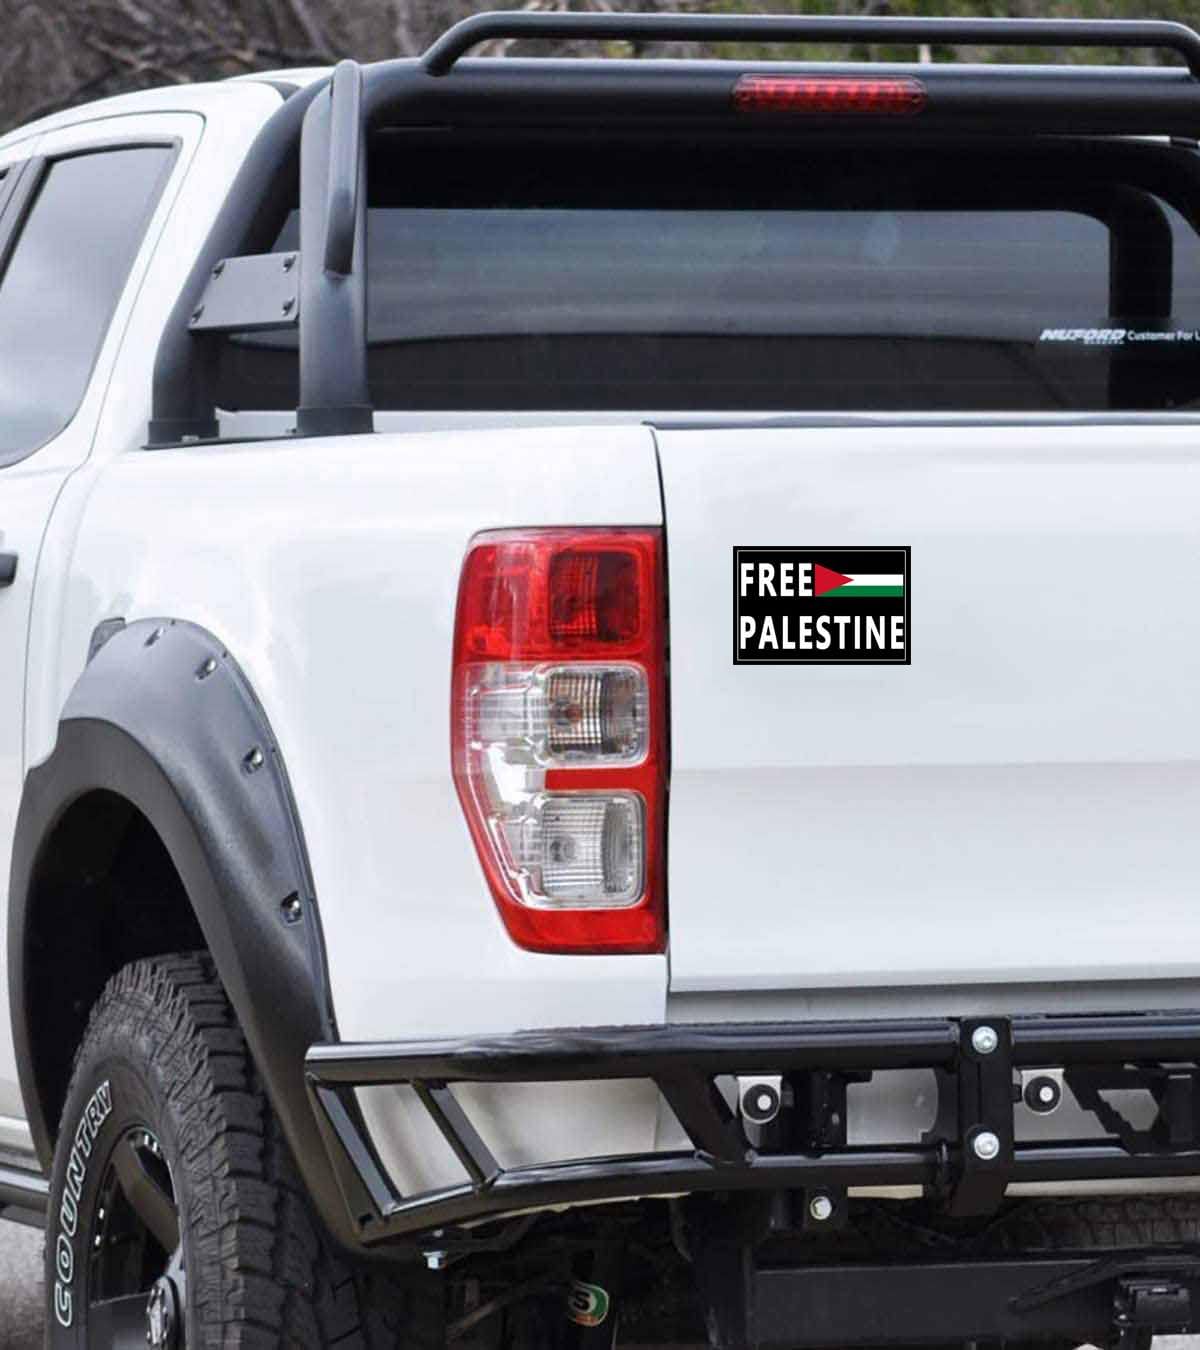 Qinry 10 Pack Free Palestine Gaza Flag Arabic Freedom for Palestinians Stand with Israel Flag Support Israel Stickers Laptop Bumper Decal Window Waterproof Car Stickers